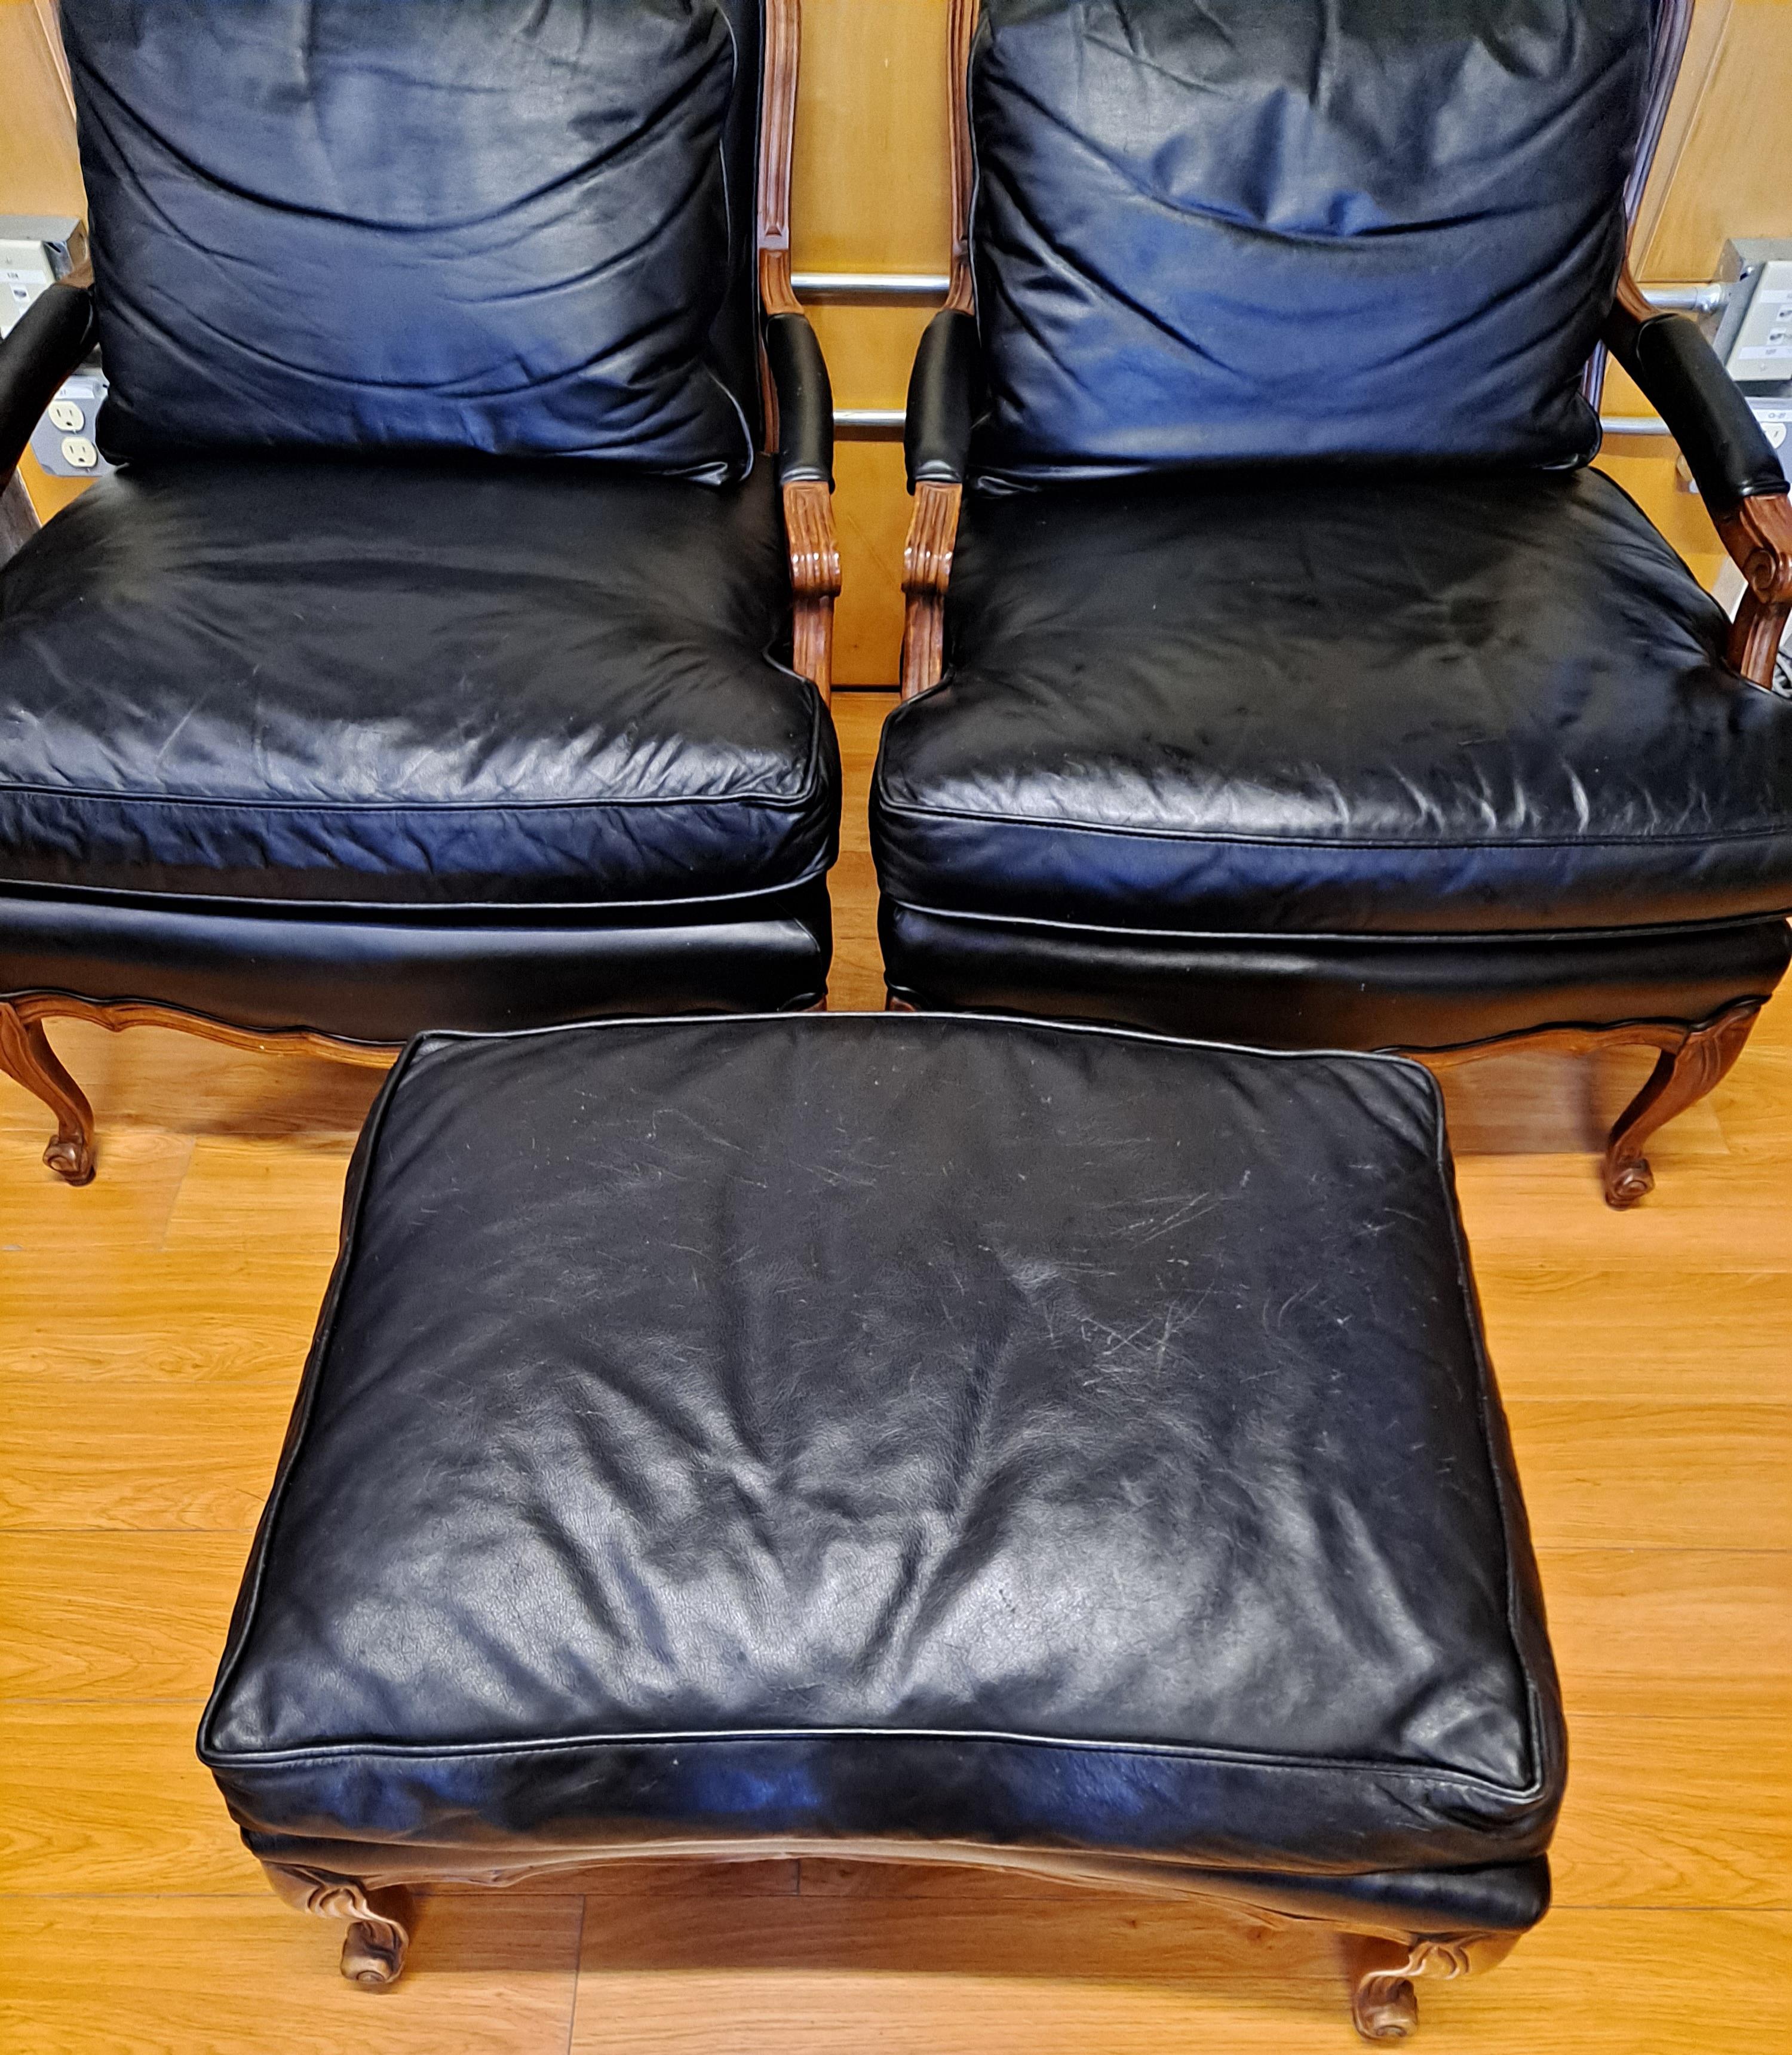 Pair of Sam Moore leather bergere-arm chairs with matching ottoman

28.5 x 20.5 x 17